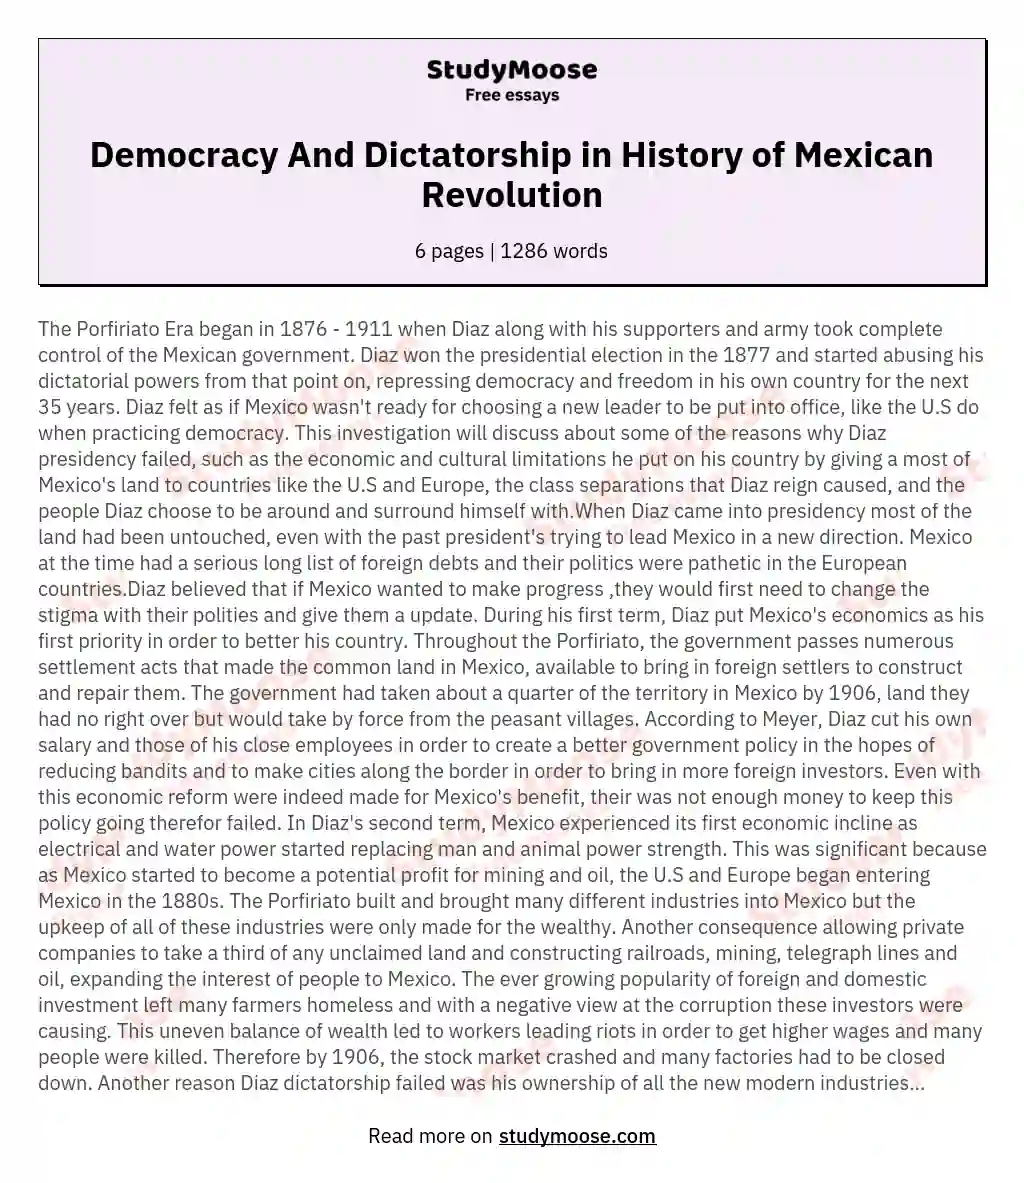 Democracy And Dictatorship in History of Mexican Revolution